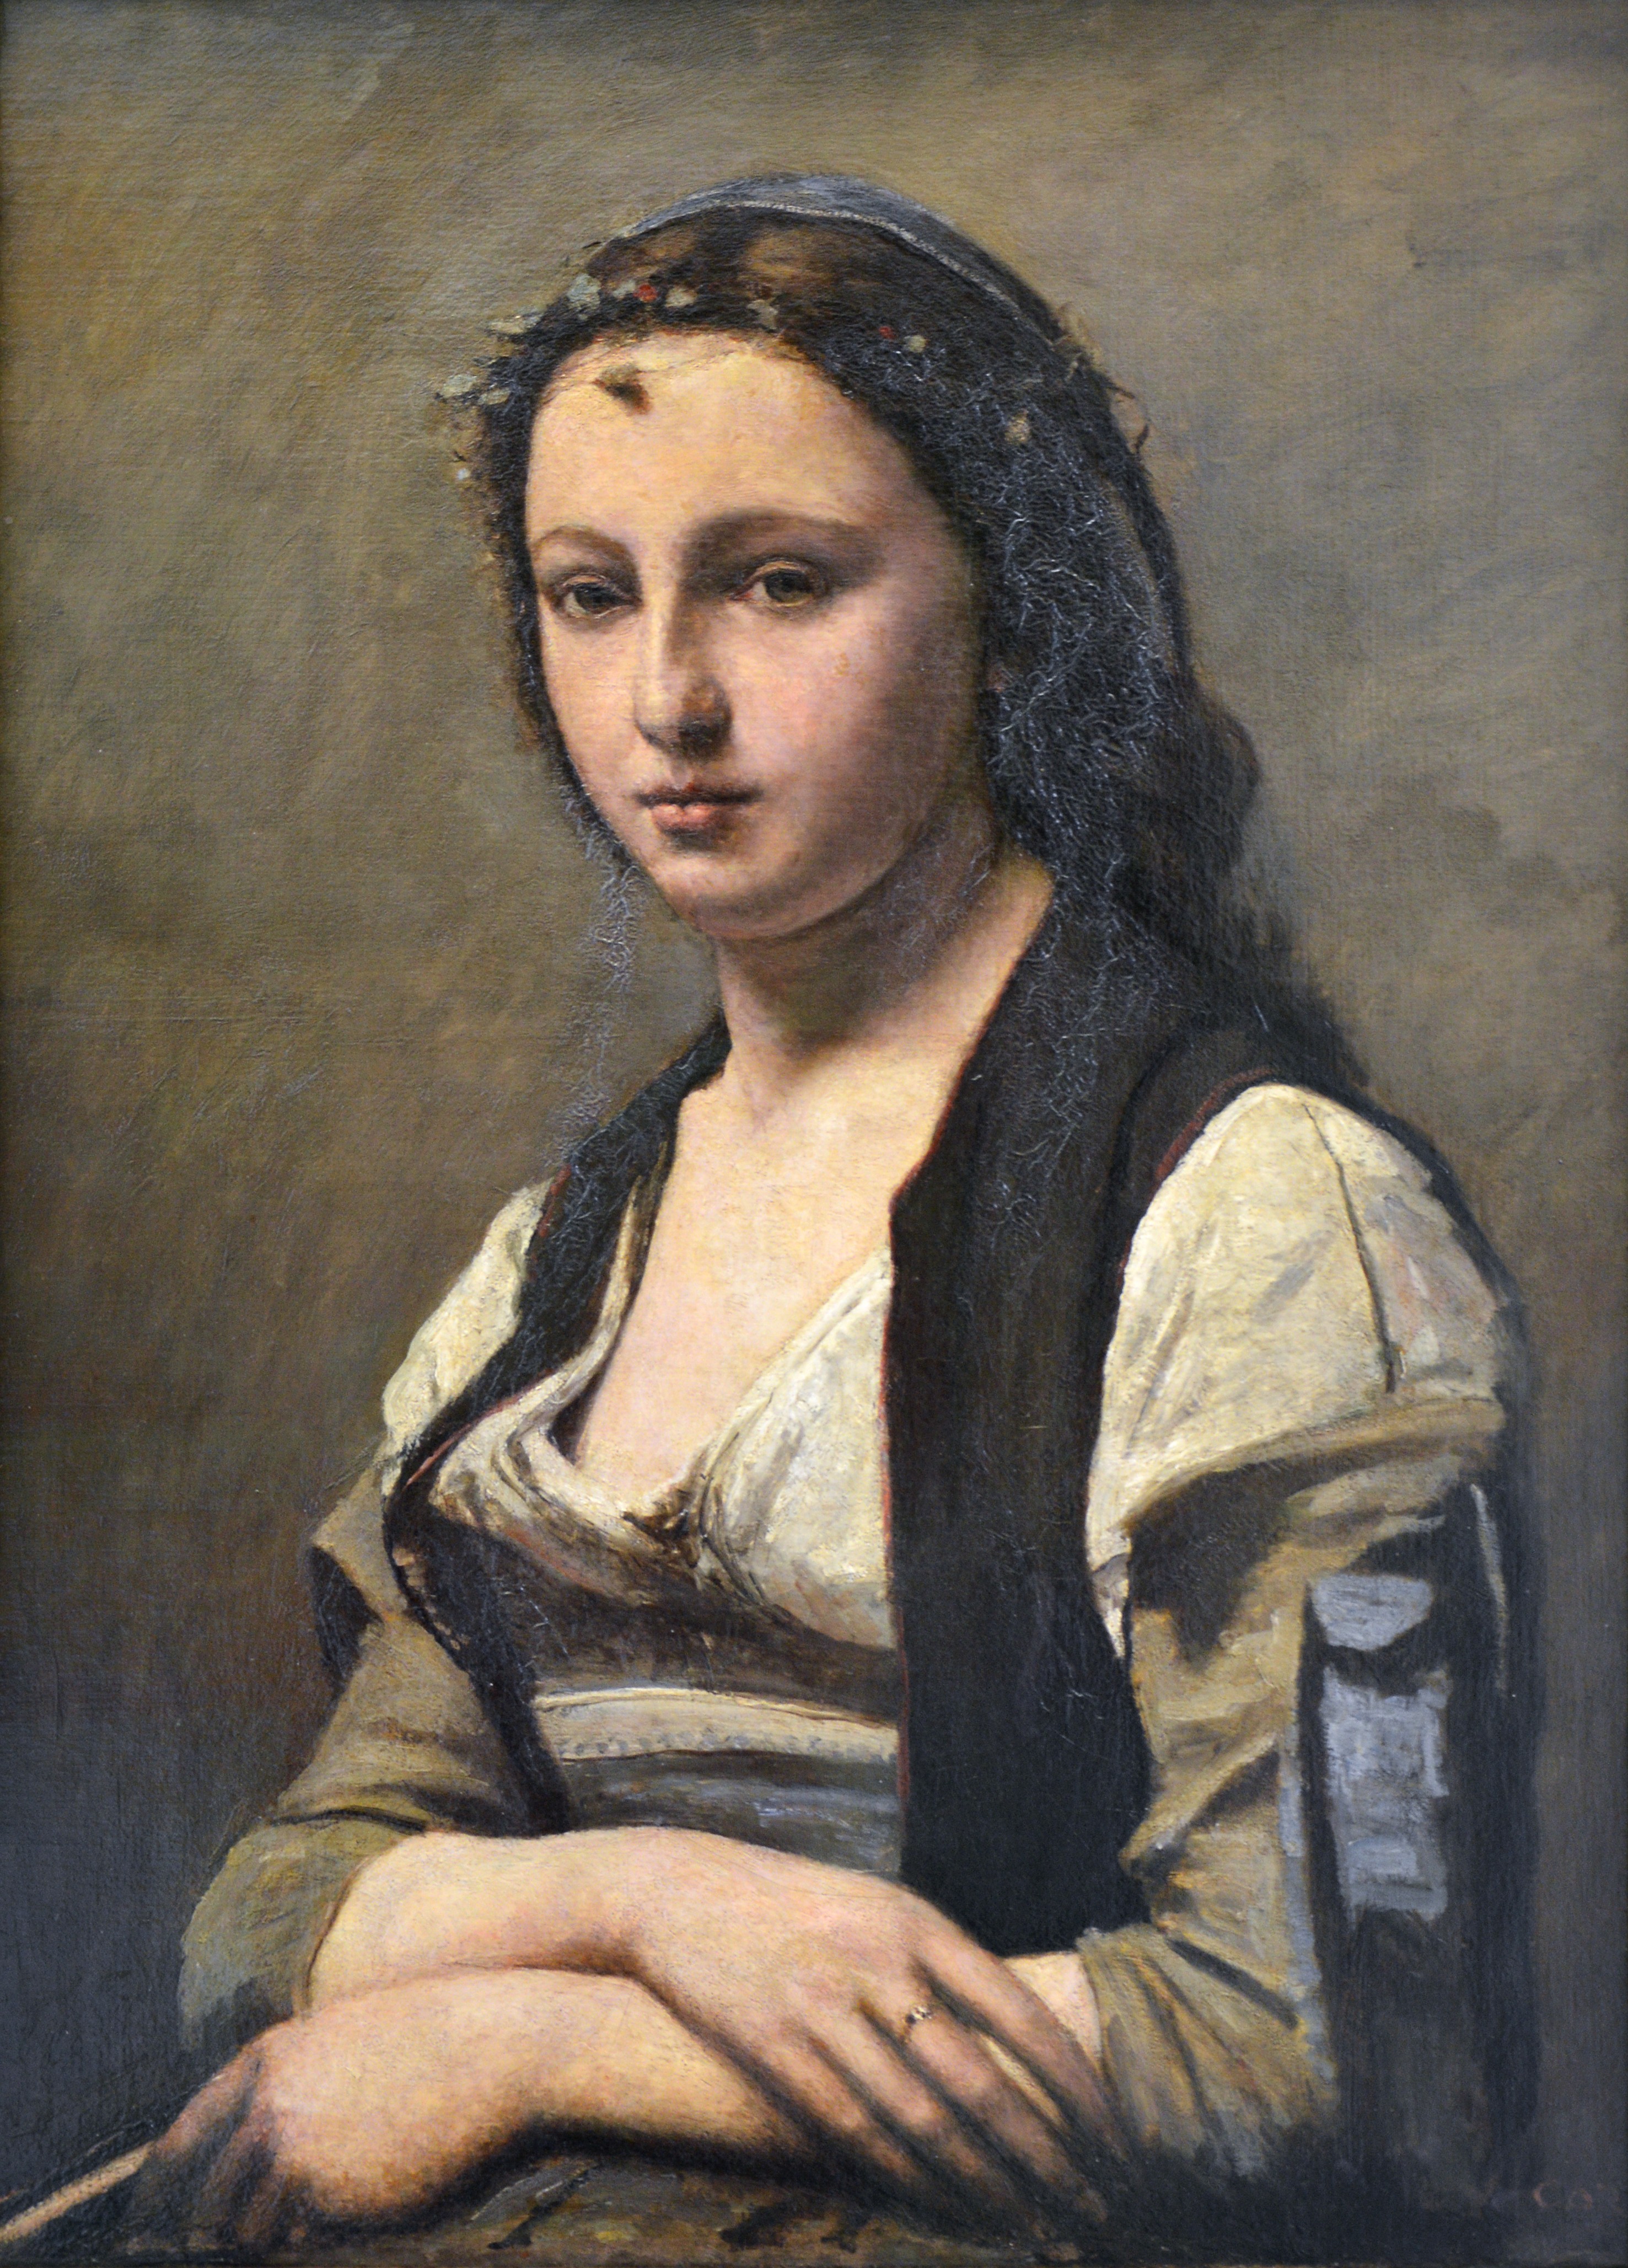 The Woman with a Pearl by Jean-Baptiste-Camille Corot - between 1868 and 1870 - 70 × 55 cm  Musée du Louvre